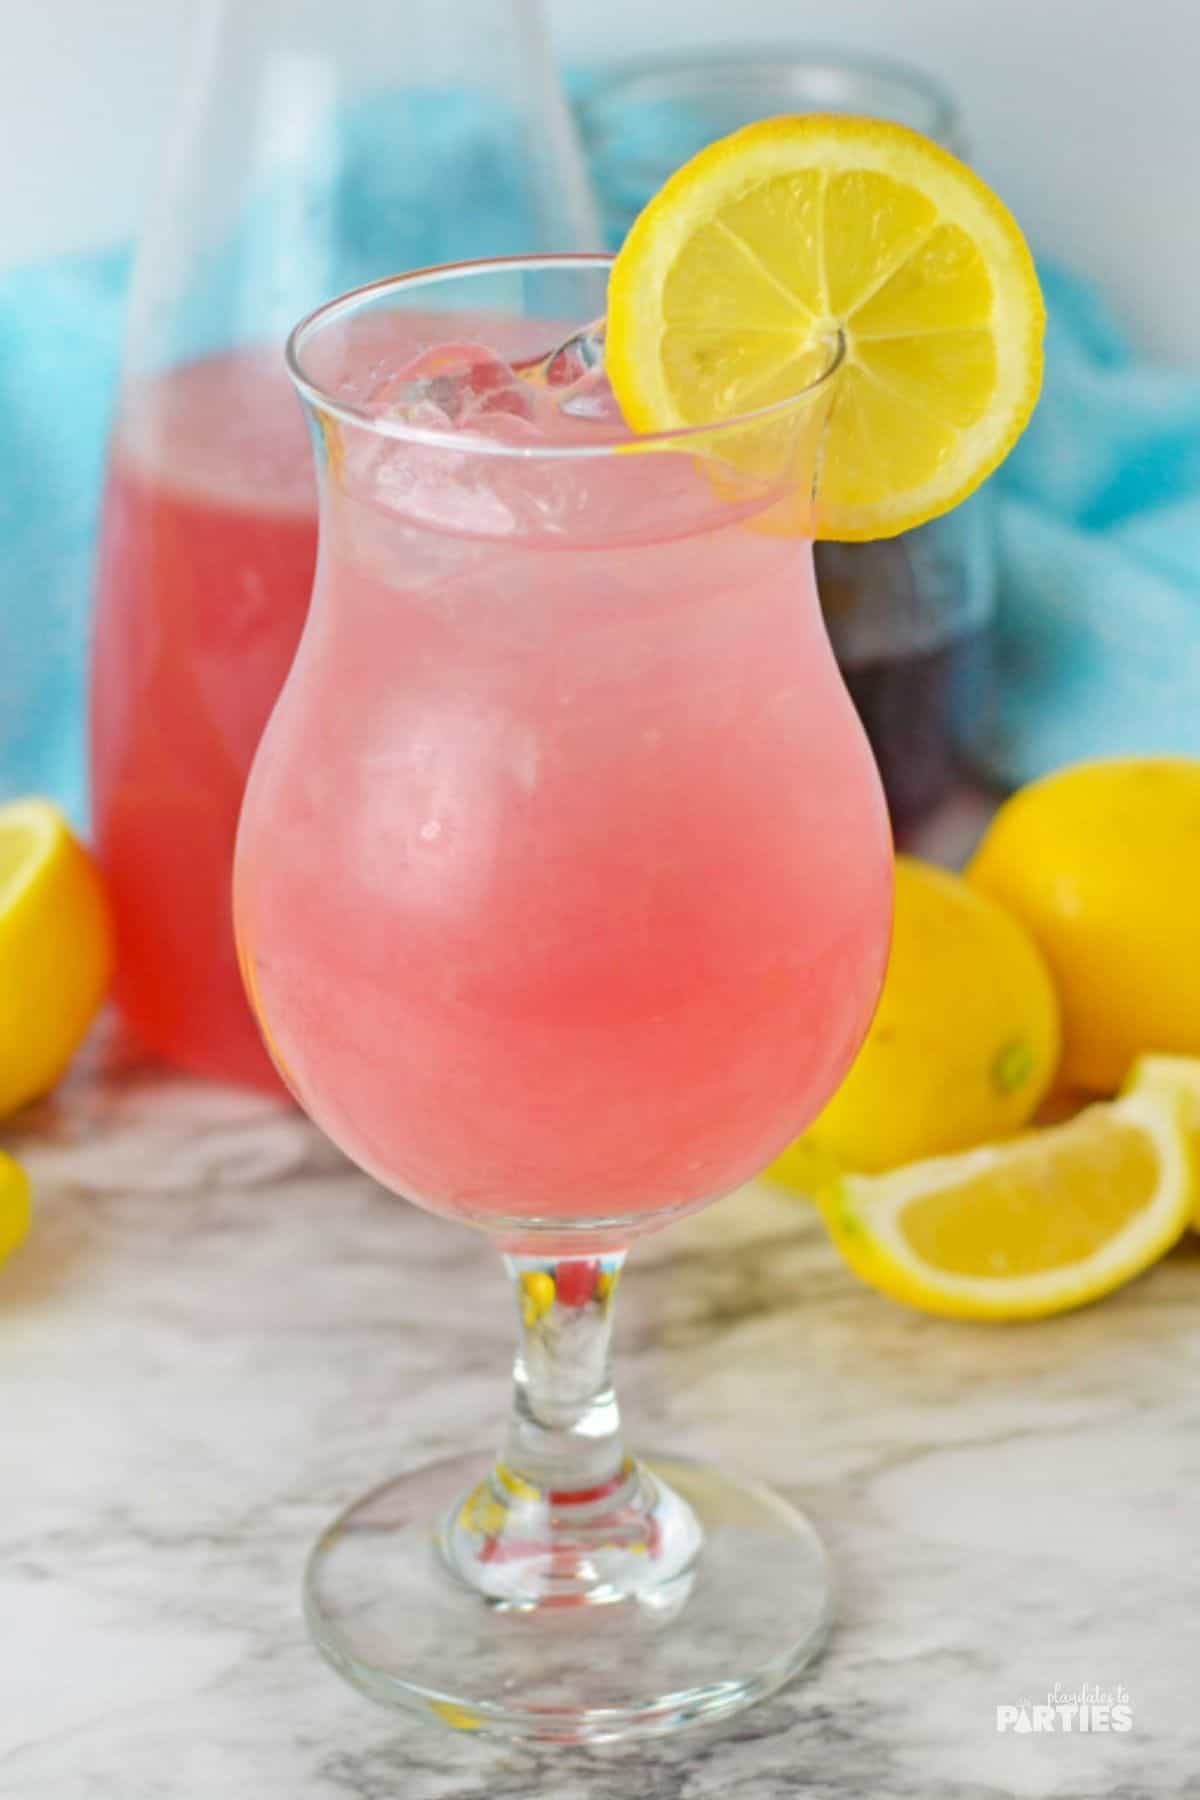 Glass of easy pink lemonade on a marble surface with lemon wedges nearby.